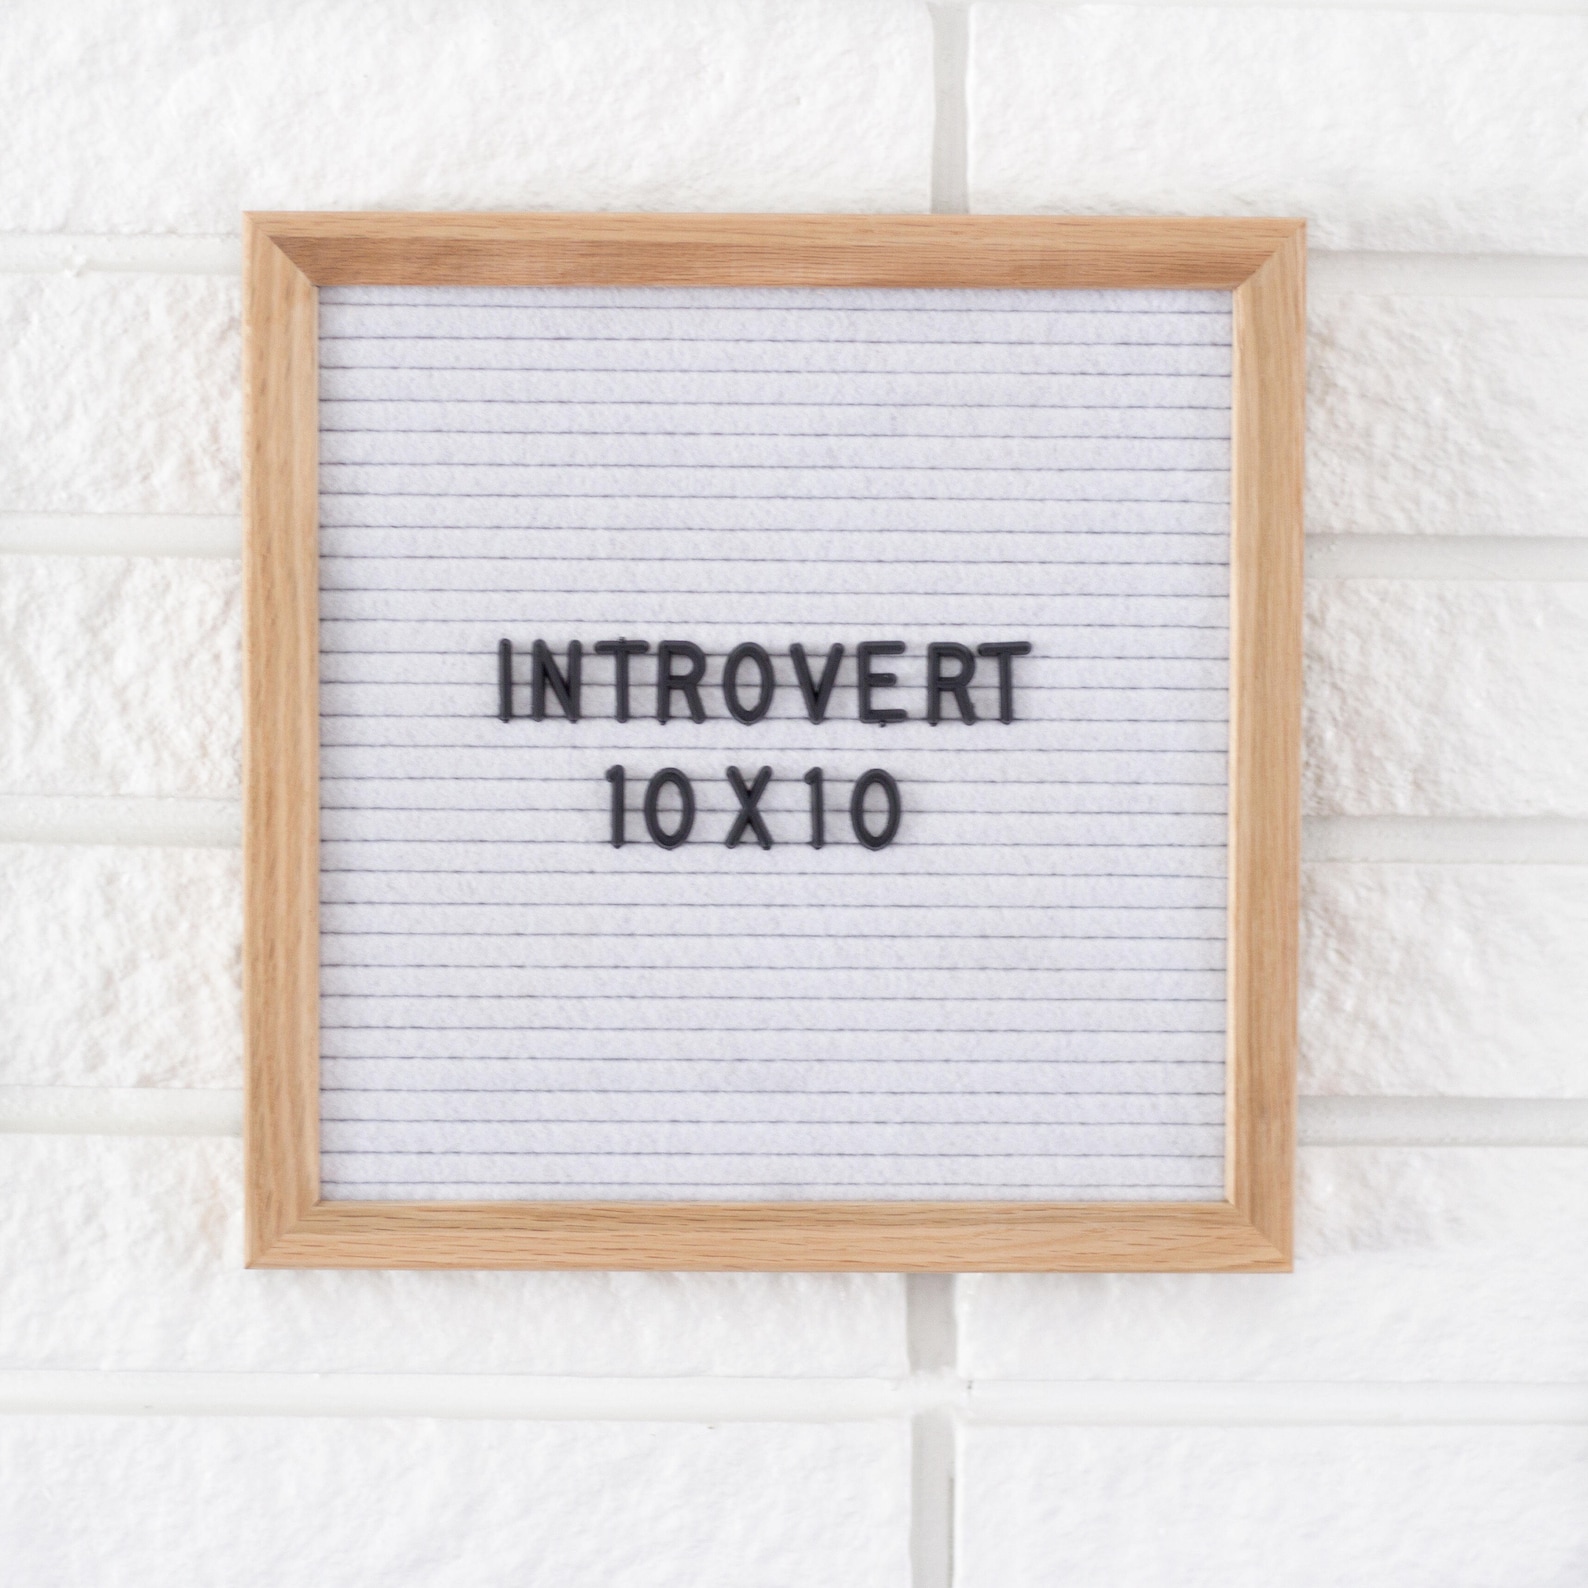 Shop Last Call  Ready to Ship  10x10 Introvert Letter from Etsy on Openhaus